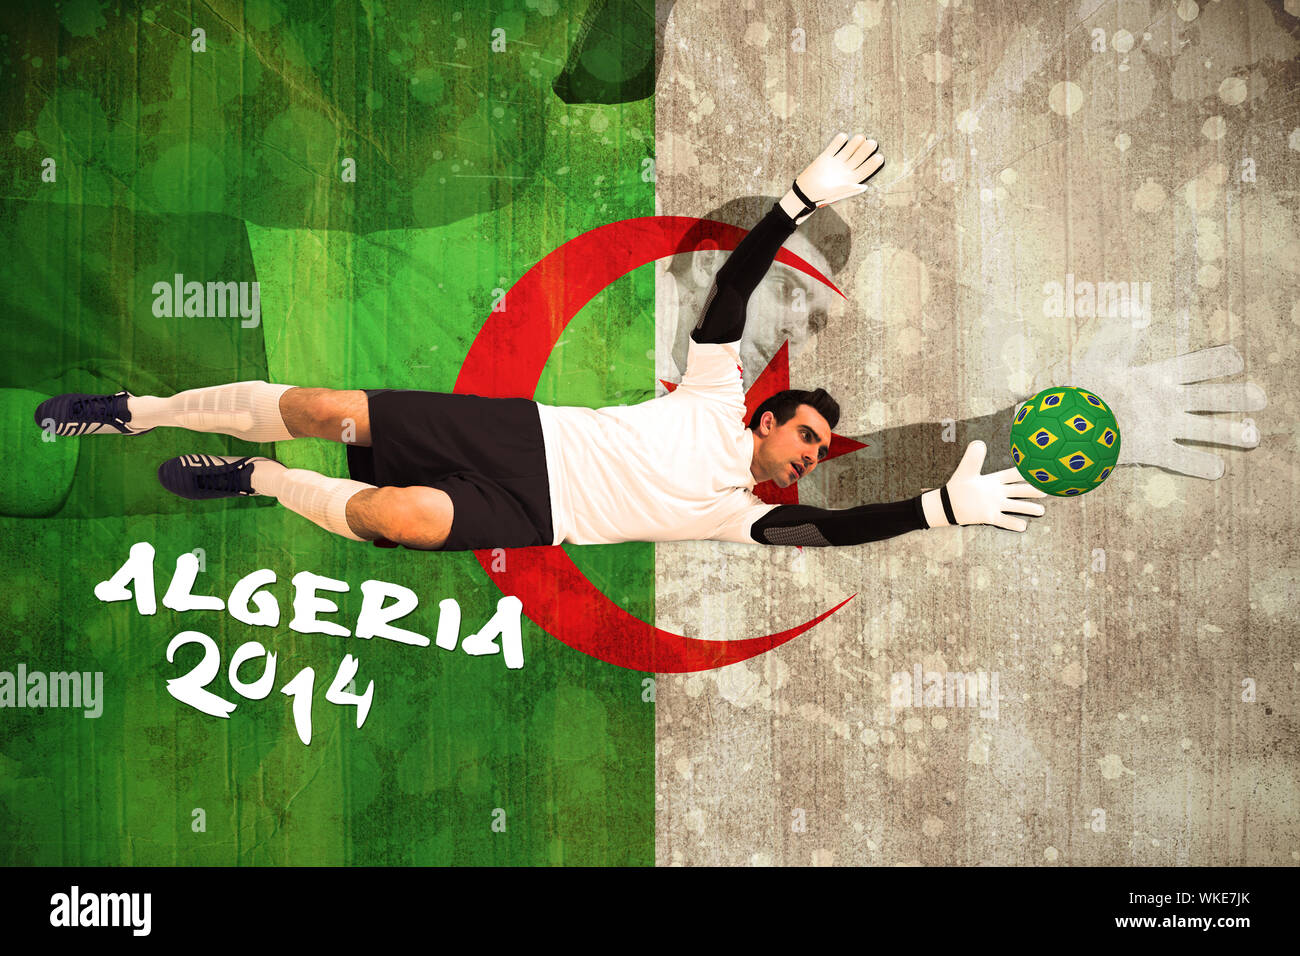 Goalkeeper in white making a save against algeria flag in grunge effect Stock Photo